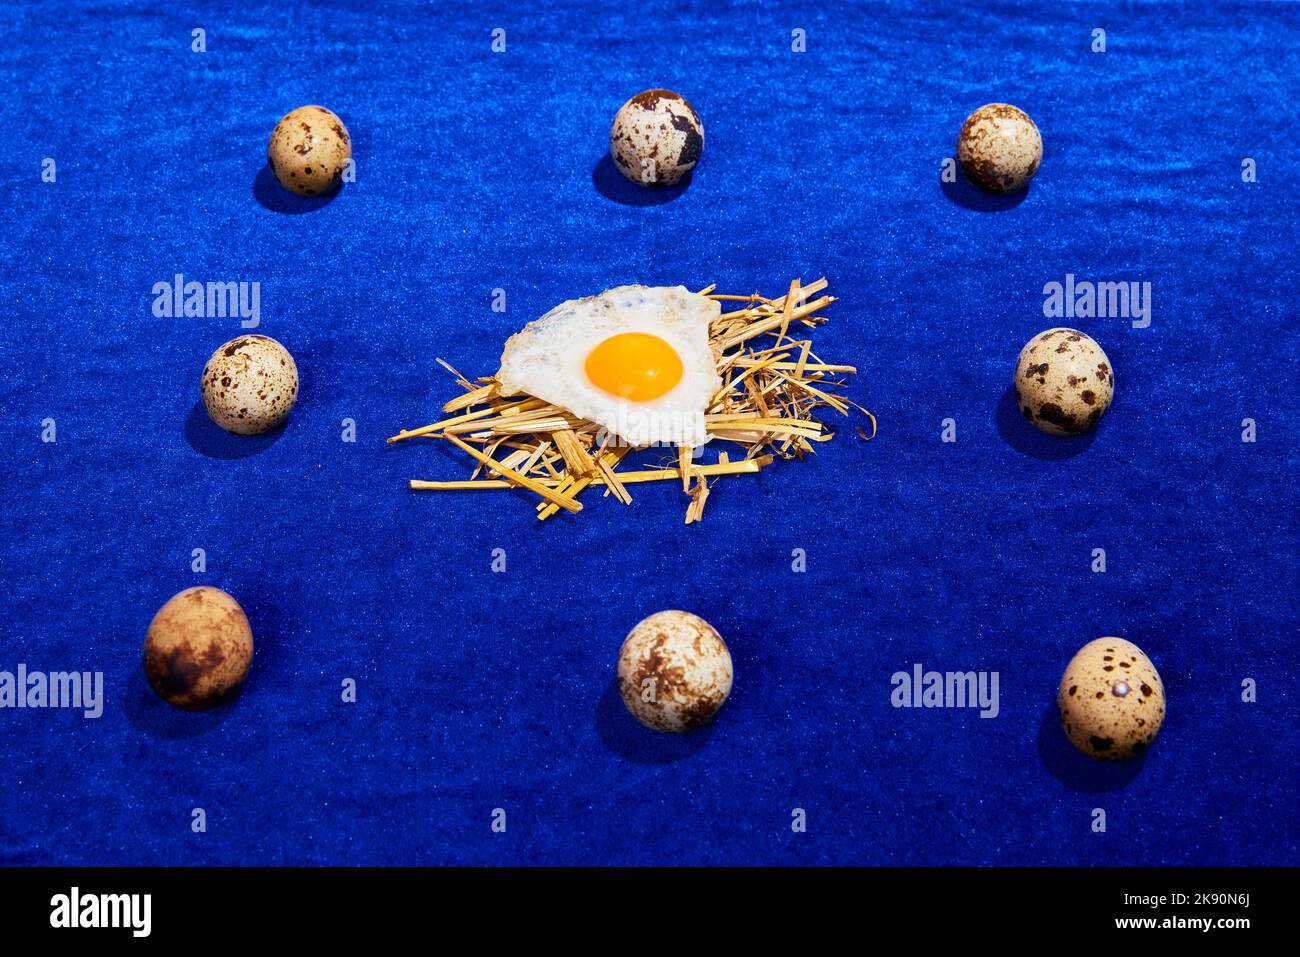 Food pop art photography. Composition with quail and chicken eggs on bright blue tablecloth. Retro style, colorful minimalism, art, creativity Stock Photo